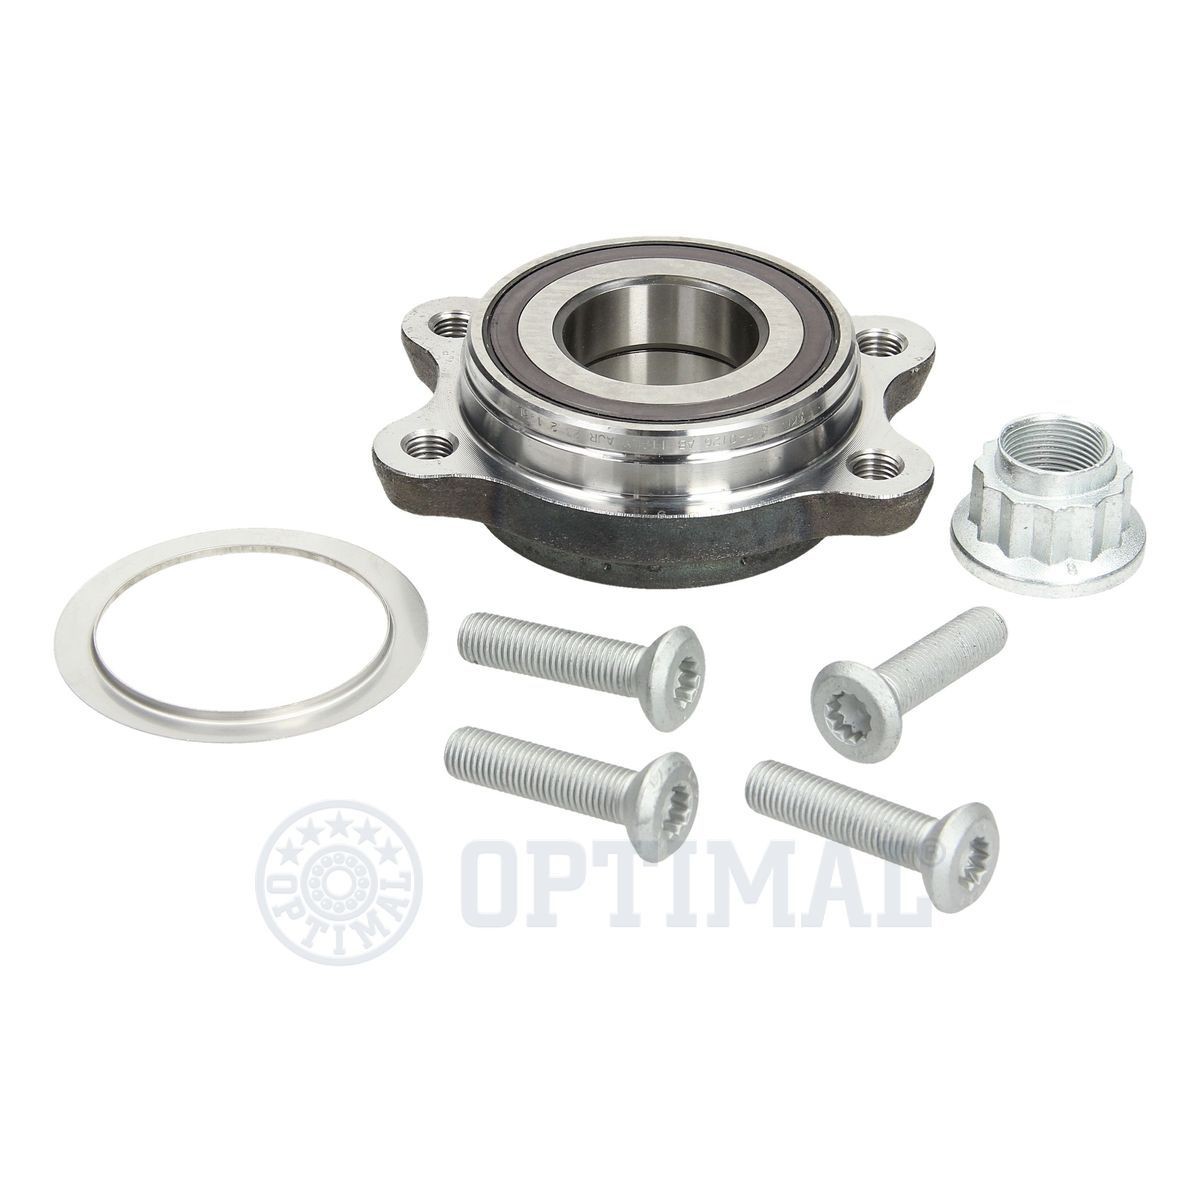 OPTIMAL 100008 Wheel bearing kit Rear Axle Left, Rear Axle Right, Left, Right, with integrated ABS sensor, with integrated magnetic sensor ring, 92 mm